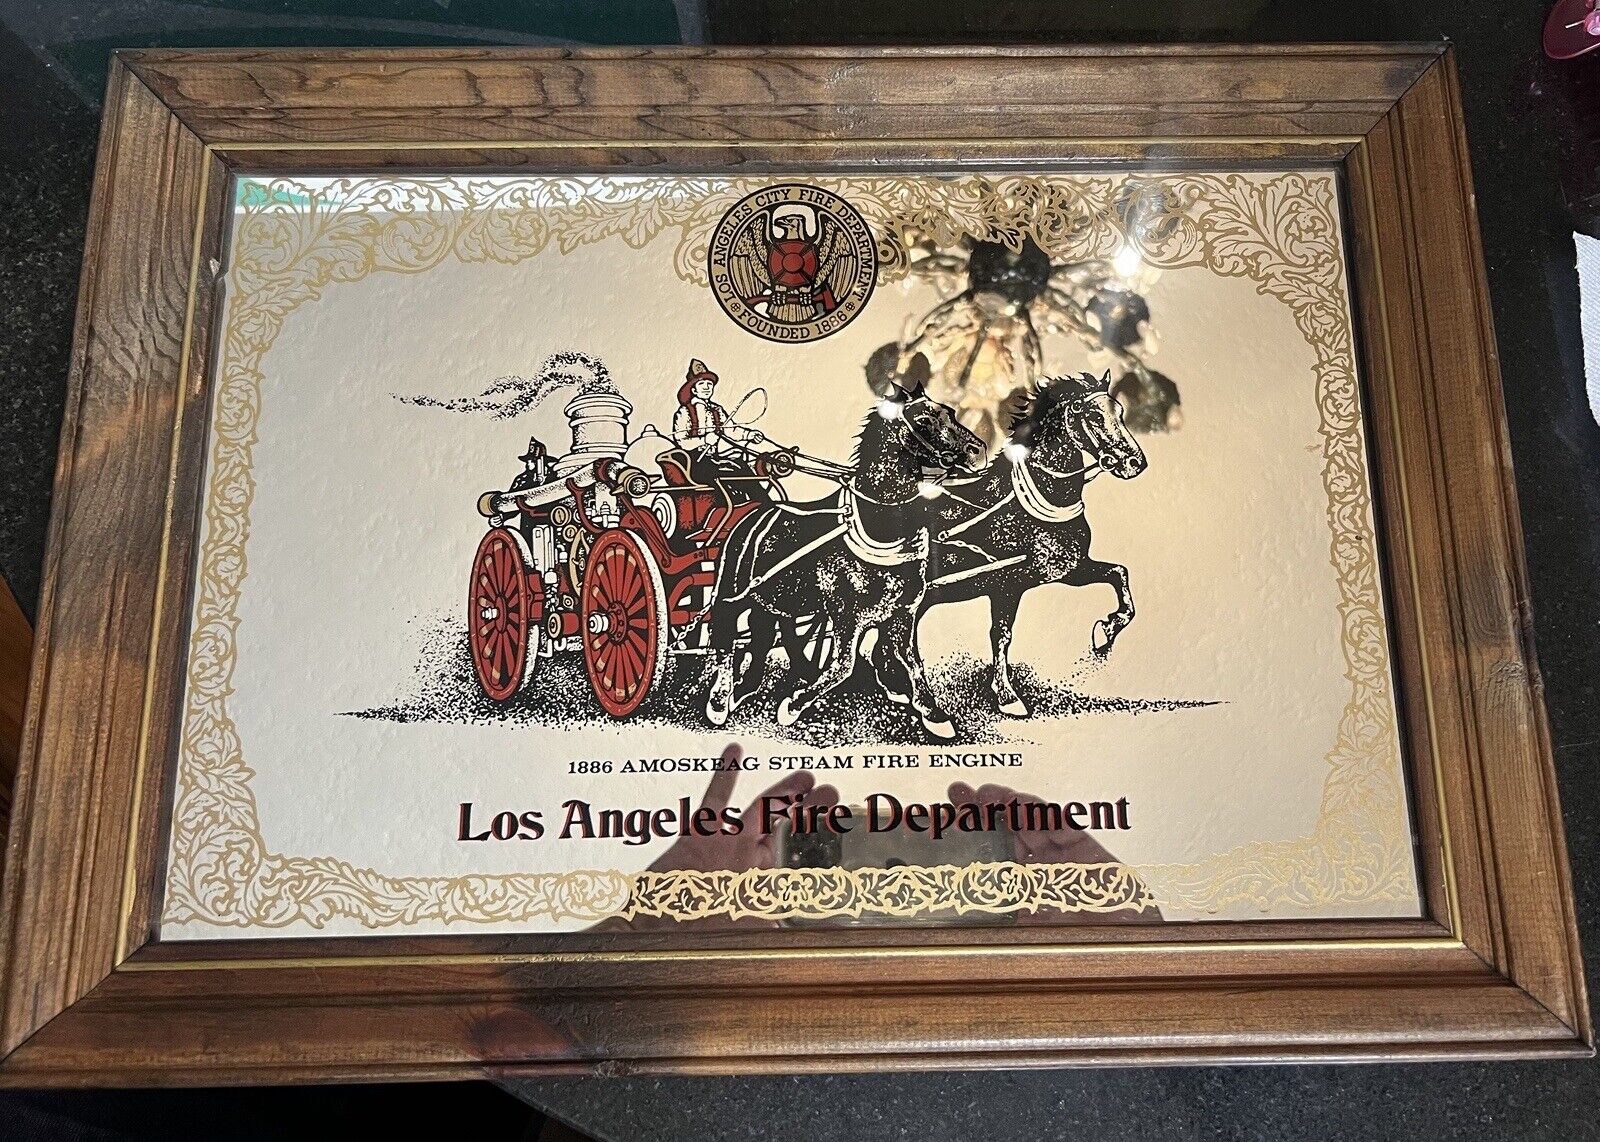 Los Angeles Fire Department Founded 1886 The Amoskeag Steamer Framed Mirror Read